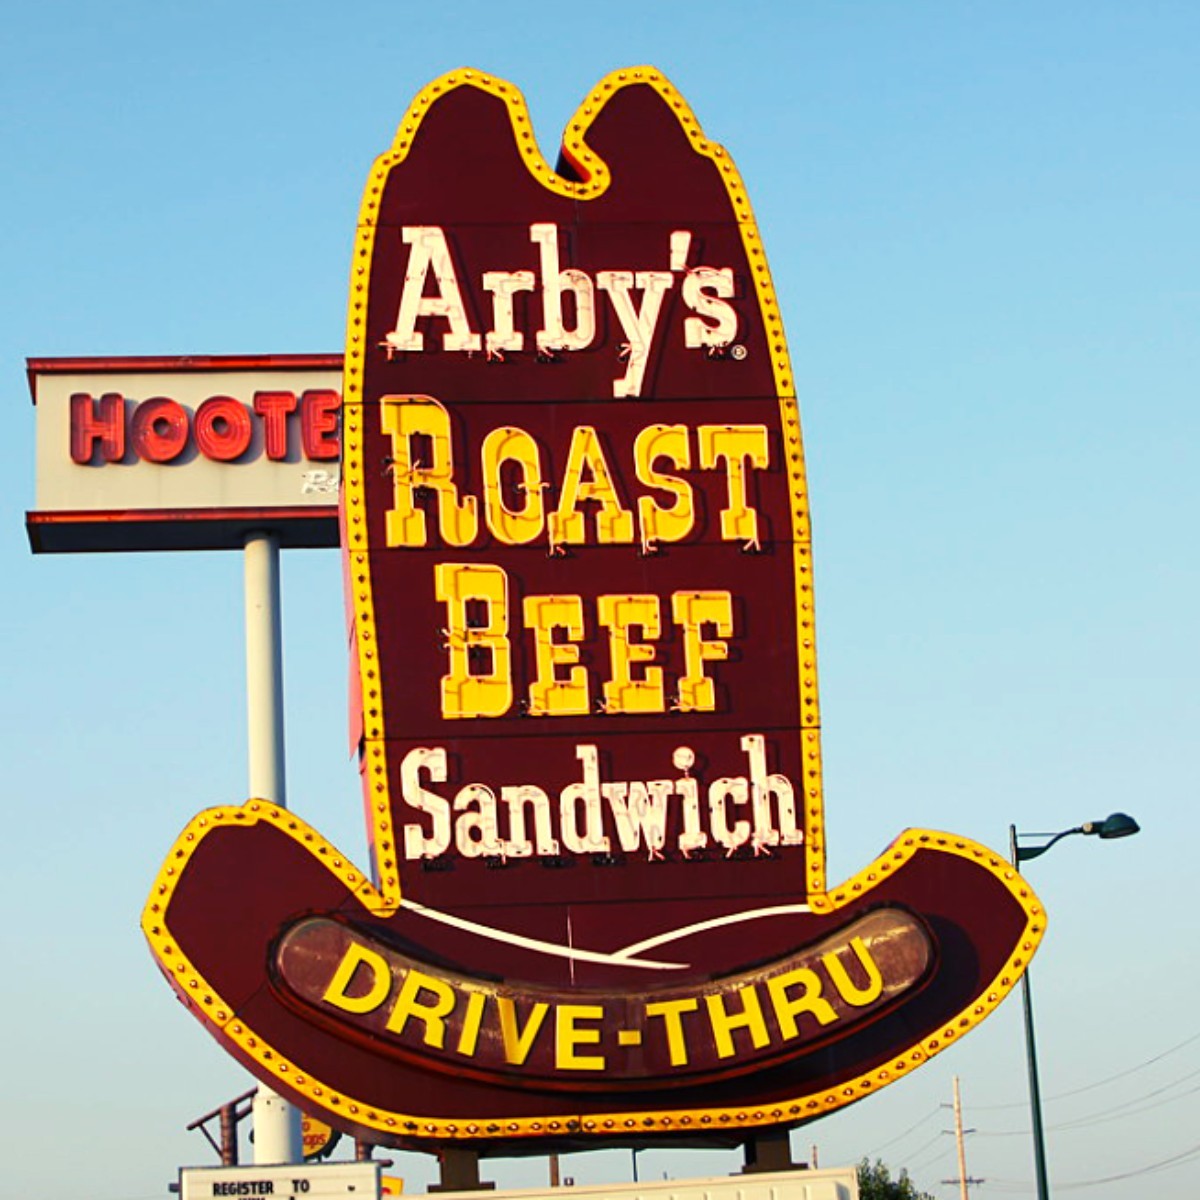 Full Guide to Arby’s Menu With Prices